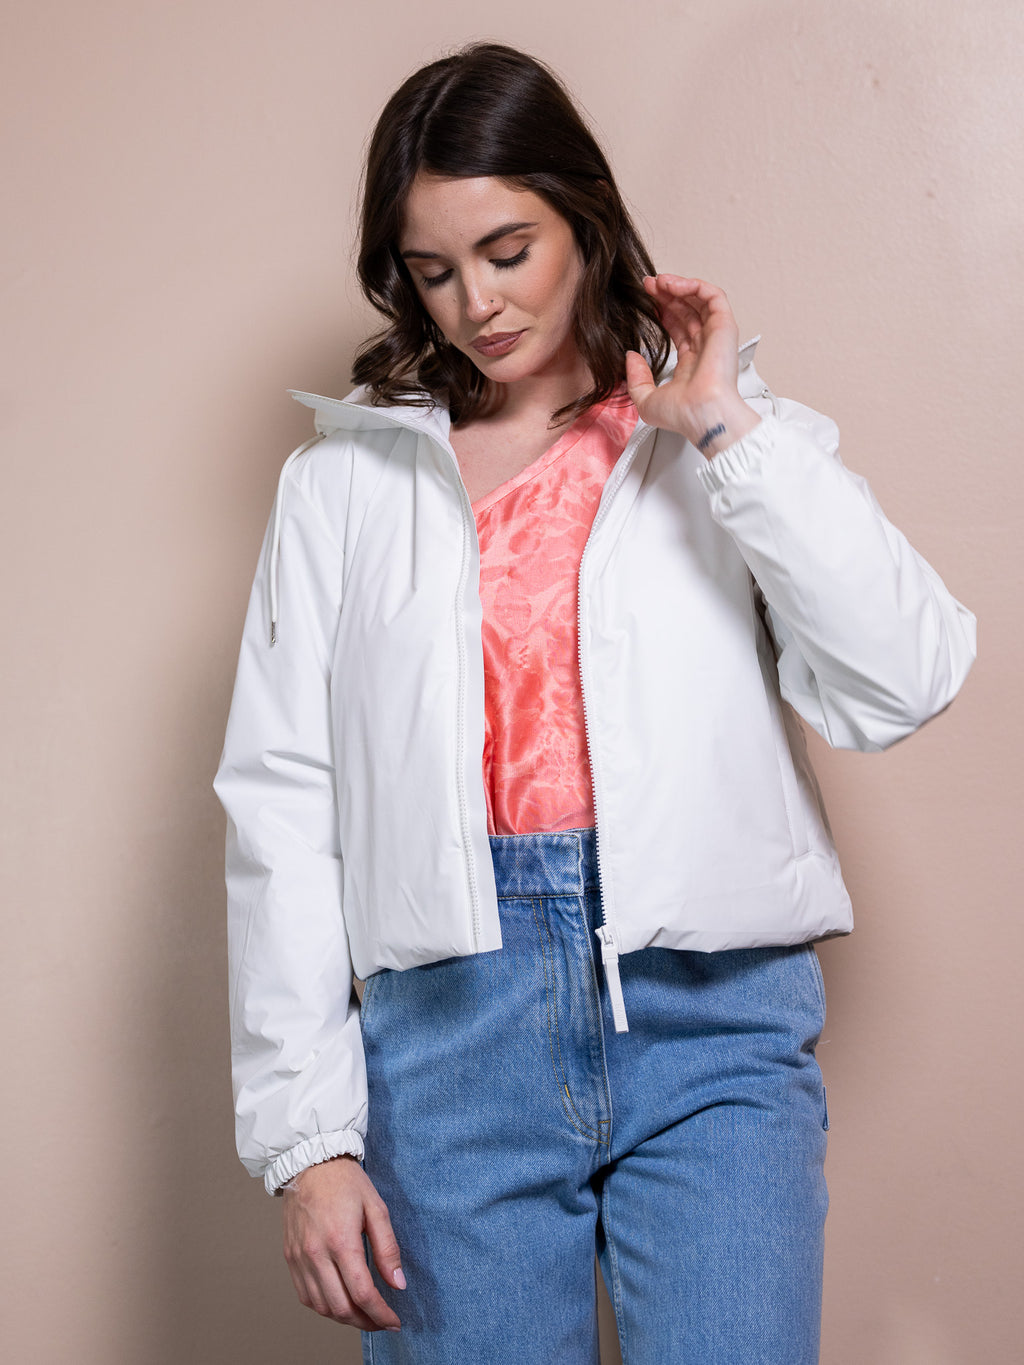 Woman in pink top, white rain jacket, and blue jeans against pink background